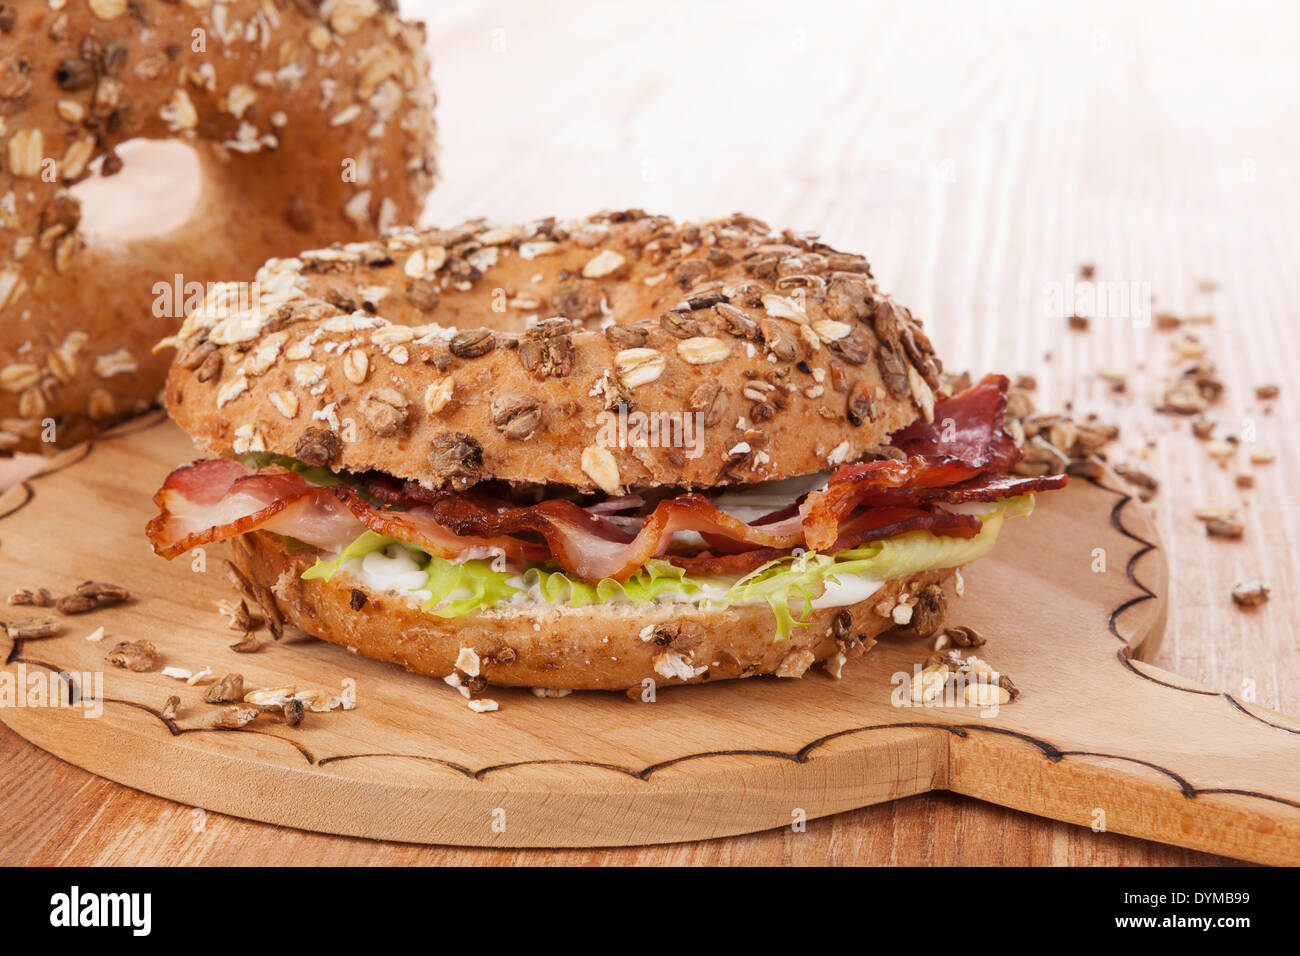 Whole grain bagel with bacon on wooden kitchen board on wooden background. Traditional bagel eating. Stock Photo